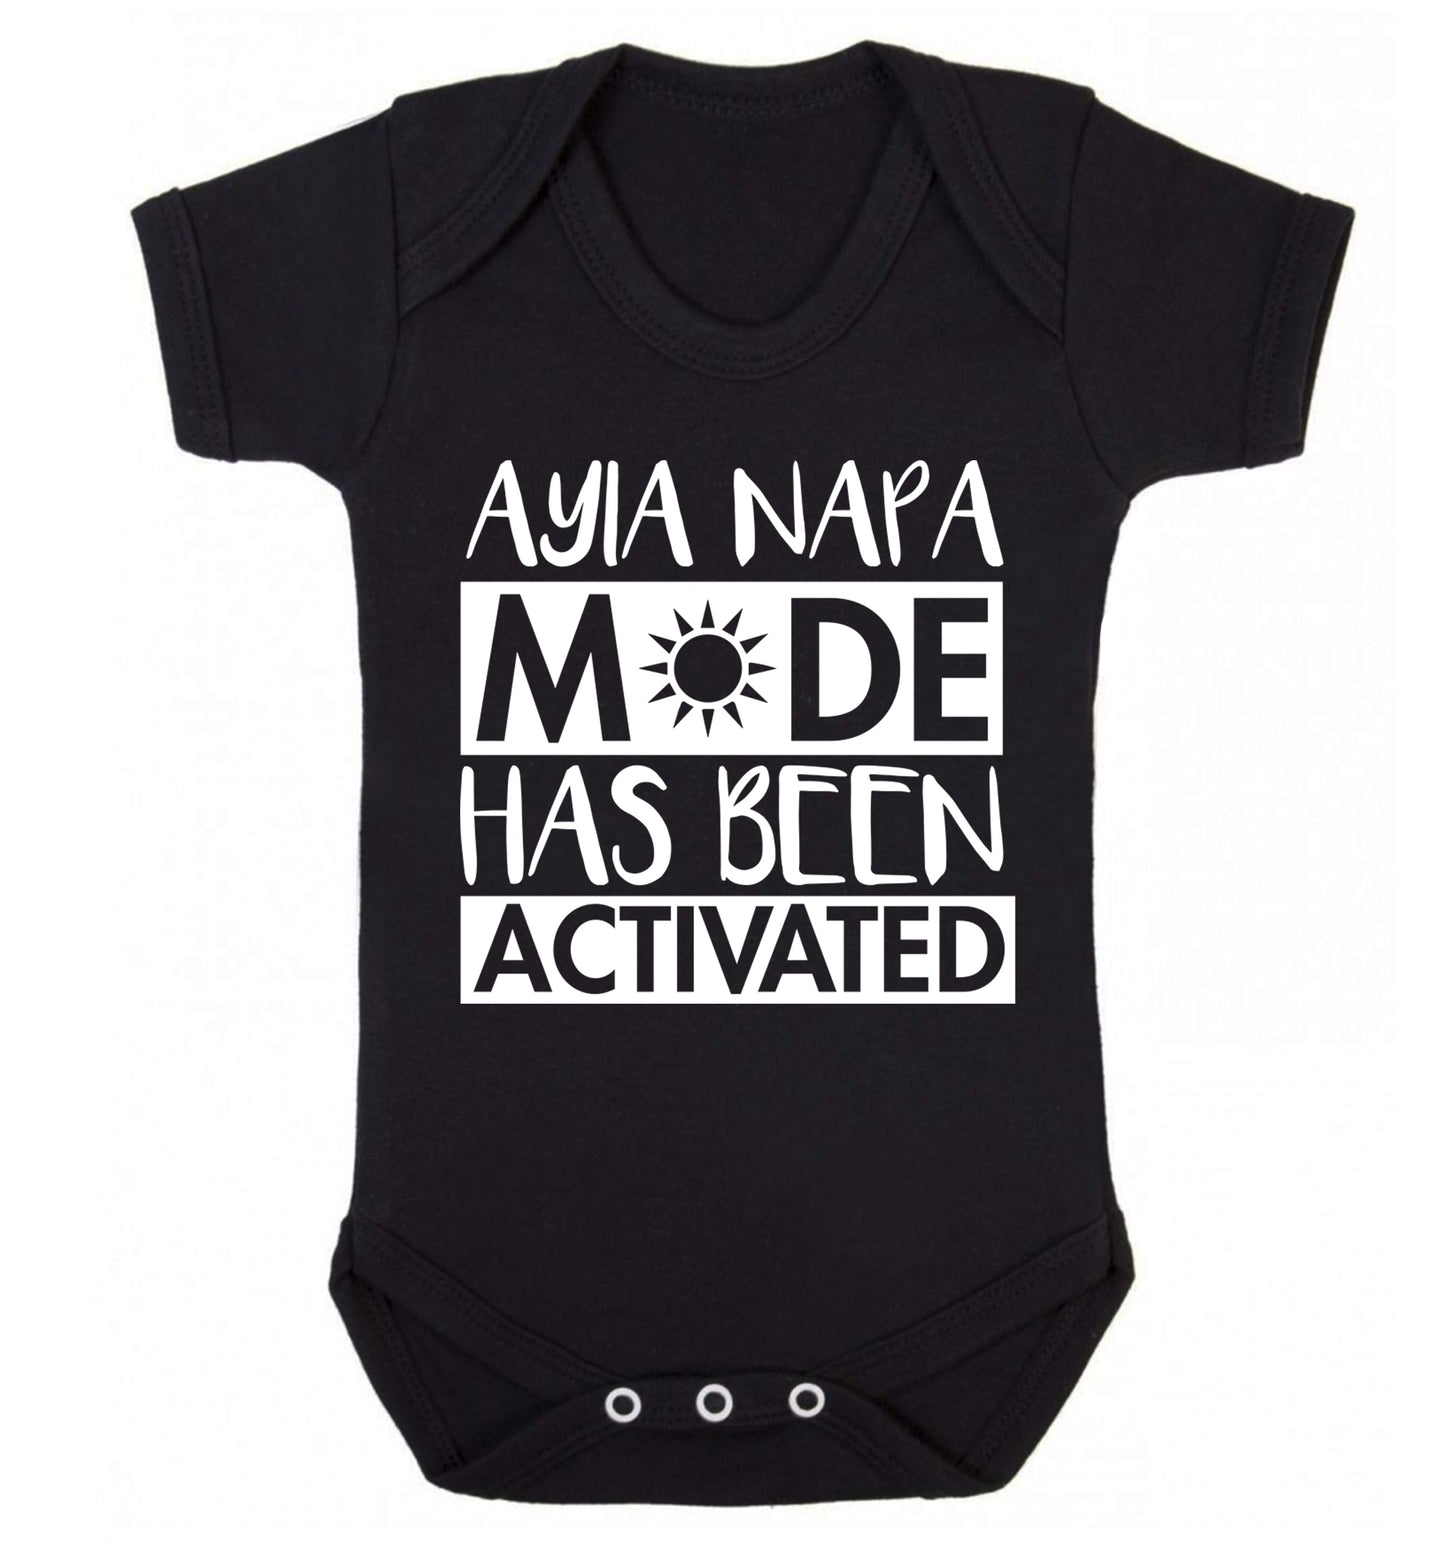 Ayia Napa mode has been activated Baby Vest black 18-24 months